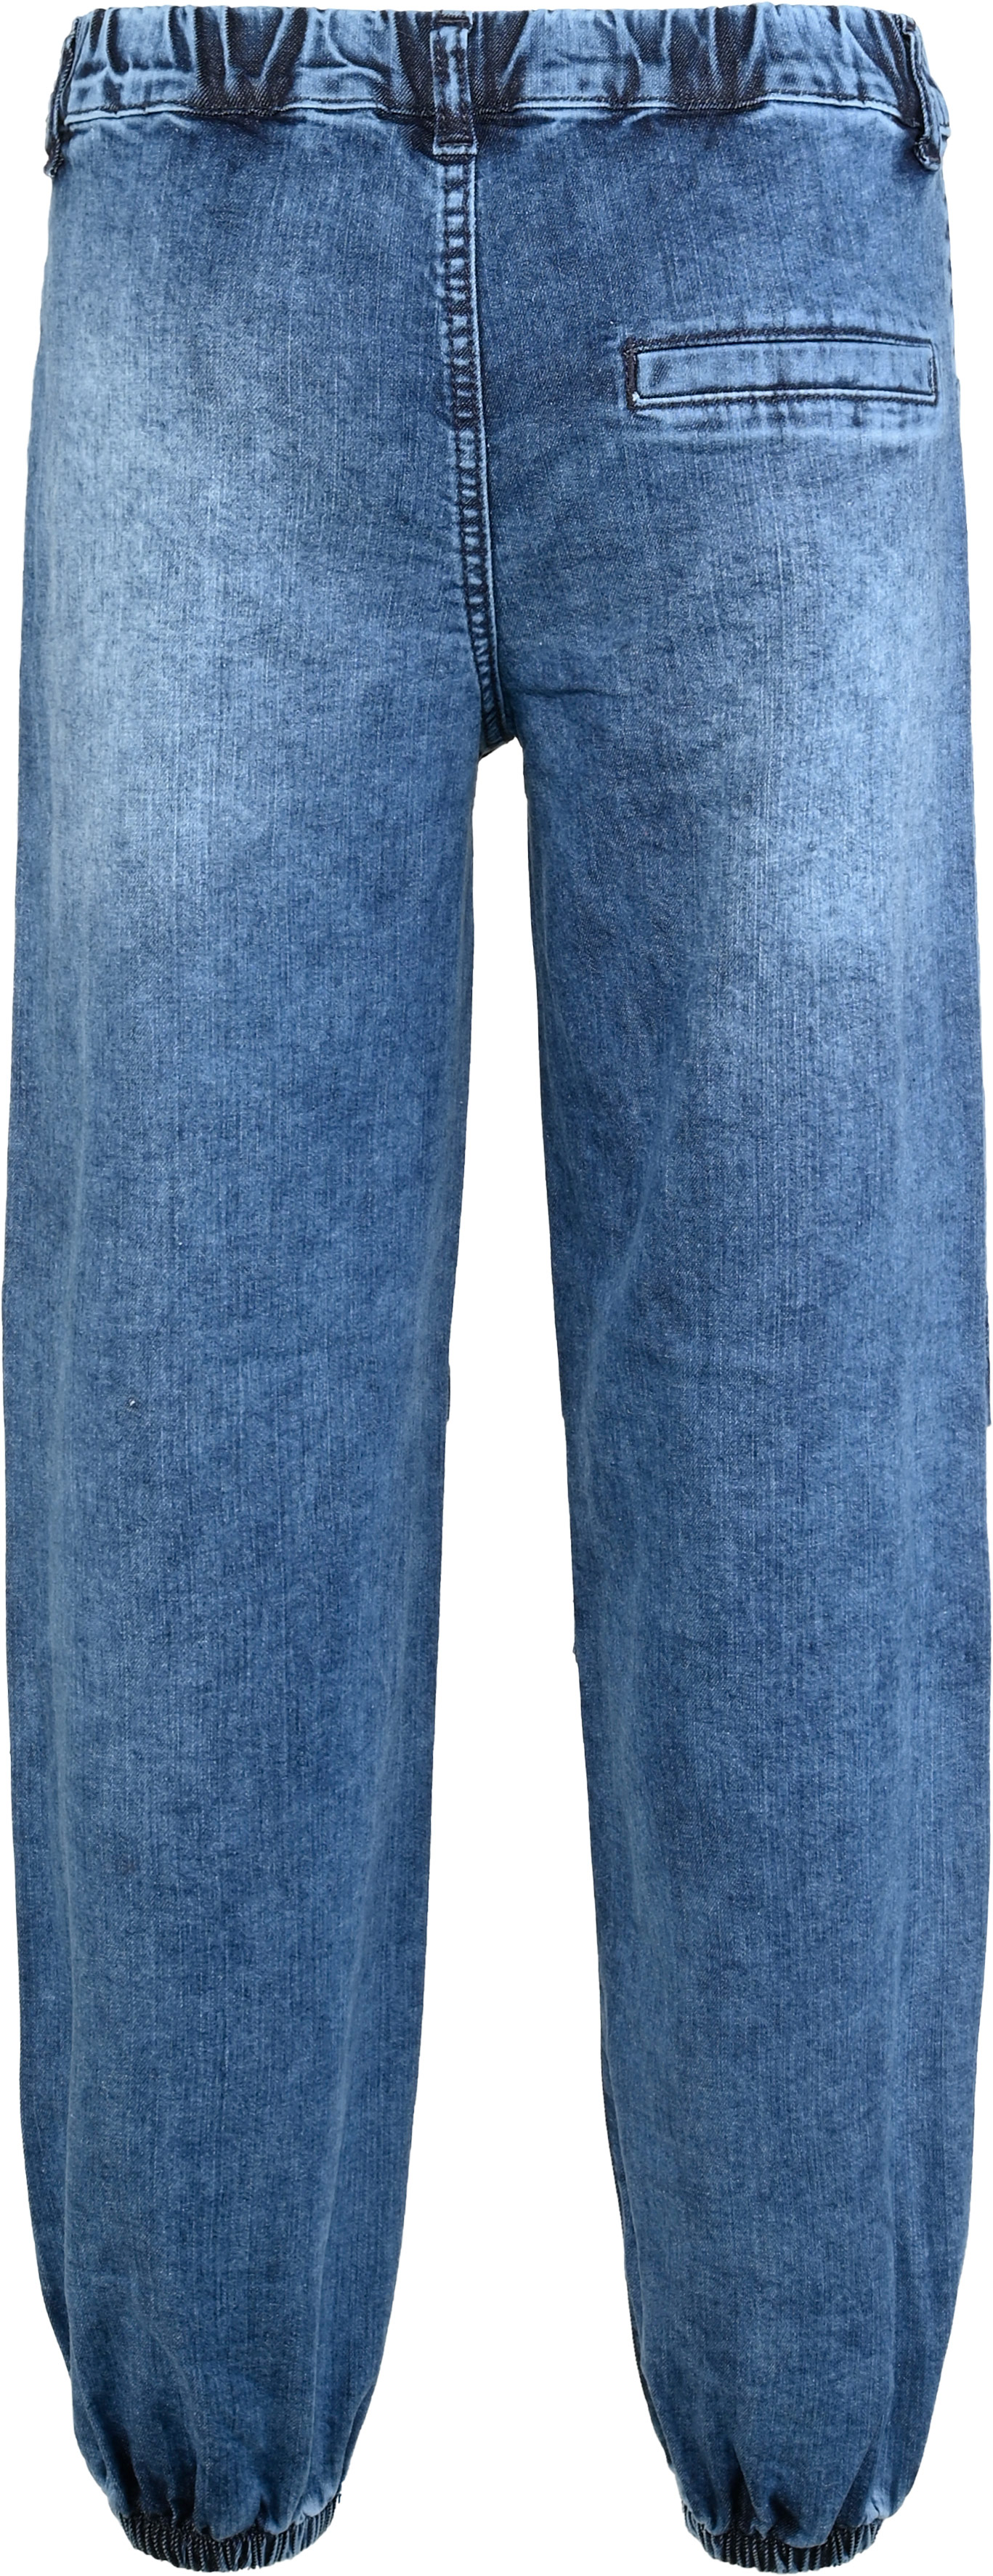 1362-Girls Parachute Jeans available in Normal